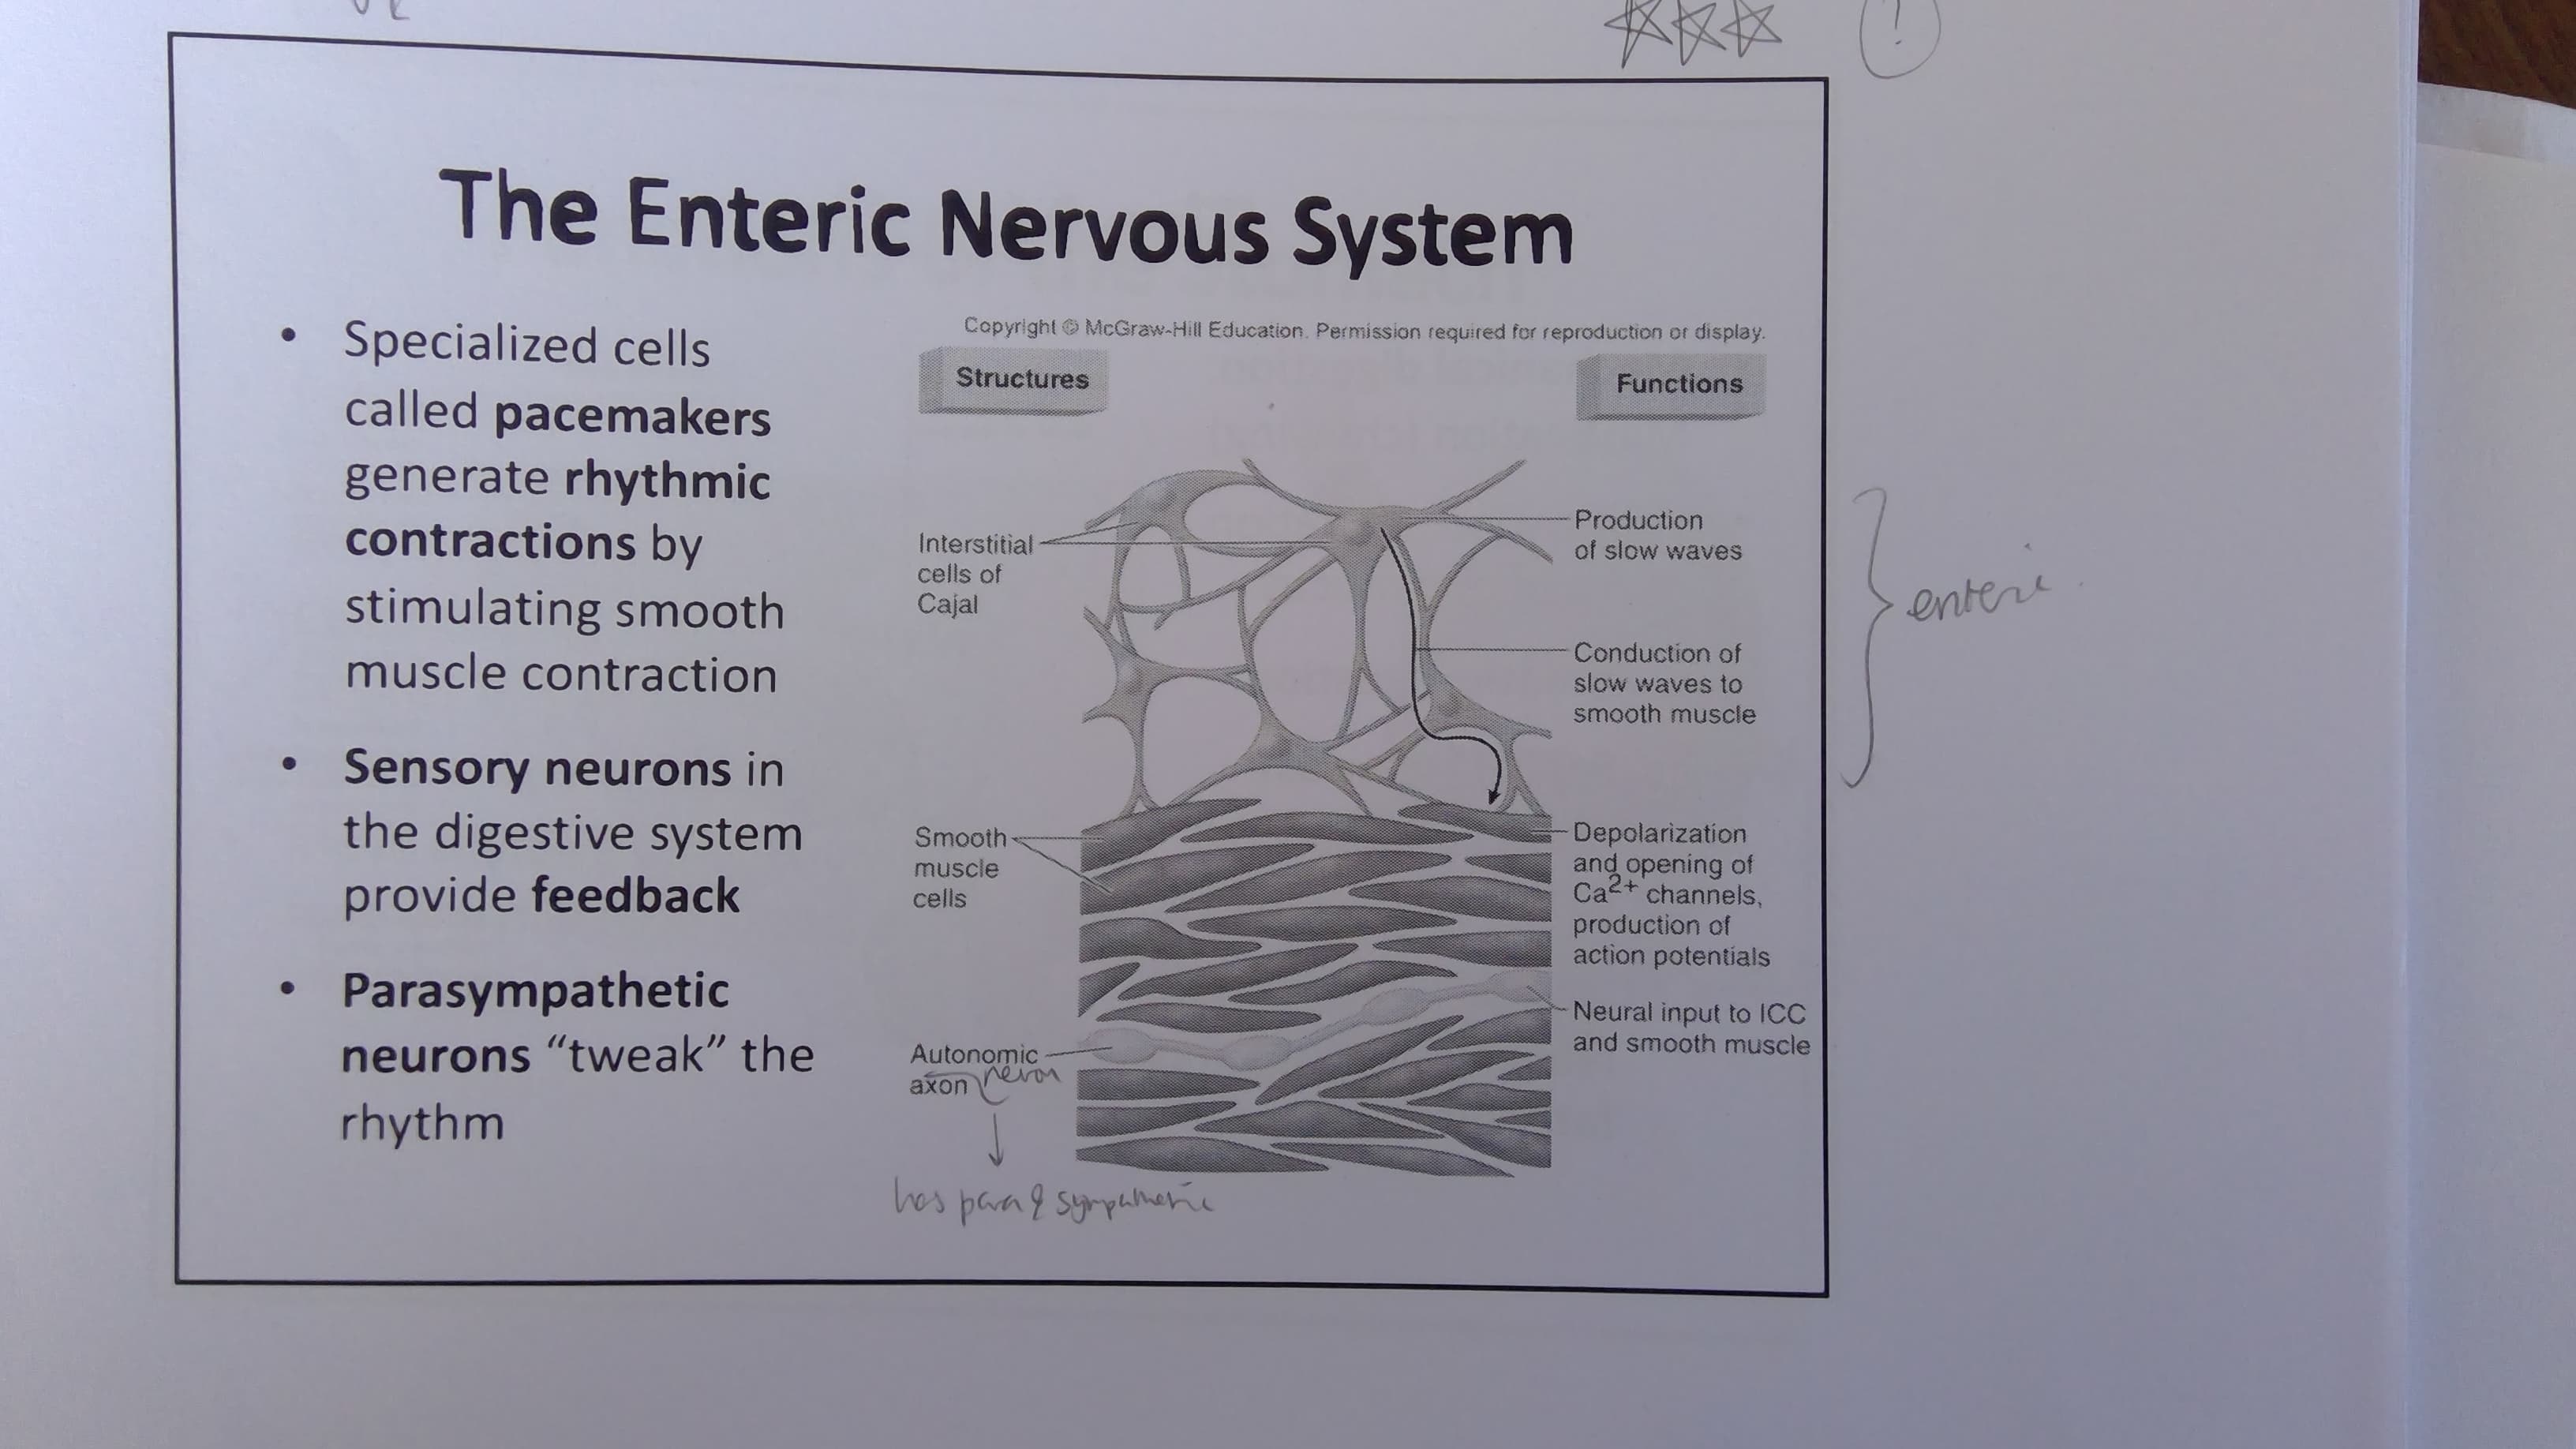 The Enteric Nervous System
Copyright
McGraw-Hill Education. Permission required for reproduction or display.
Specialized cells
called pacemakers
generate rhythmic
contractions by
stimulating smooth
Structures
Functions
Production
Interstitial
cells of
of slow waves
enter
Cajal
Conduction of
slow waves to
muscle contraction
smooth muscle
Sensory neurons in
the digestive system
provide feedback
Depolarization
Smooth
and opening of
Caz+ channels,
muscle
cells
production of
action potentials
Parasympathetic
Neural input to ICC
and smooth muscle
neurons "twe ak" the
Autonomic
en
axon
rhythm
hes paag syrpiner
